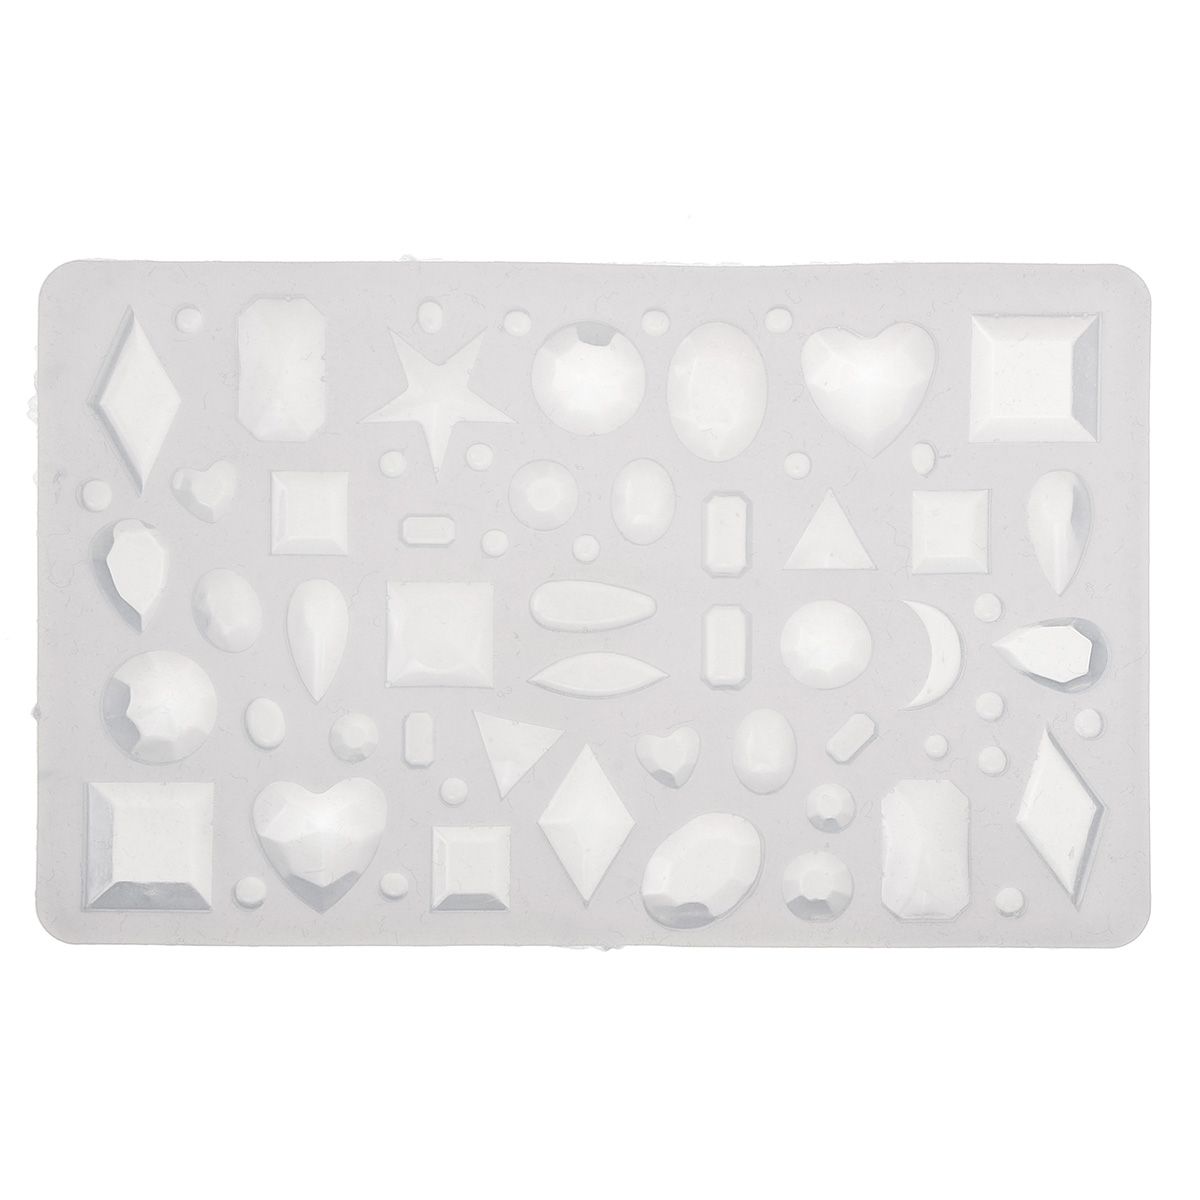 141Pcs-DIY-Silicone-Resin-Casting-Molds-Pendant-Making-Necklace-Mould-Hand-Craft-Tools-Kit-1519269